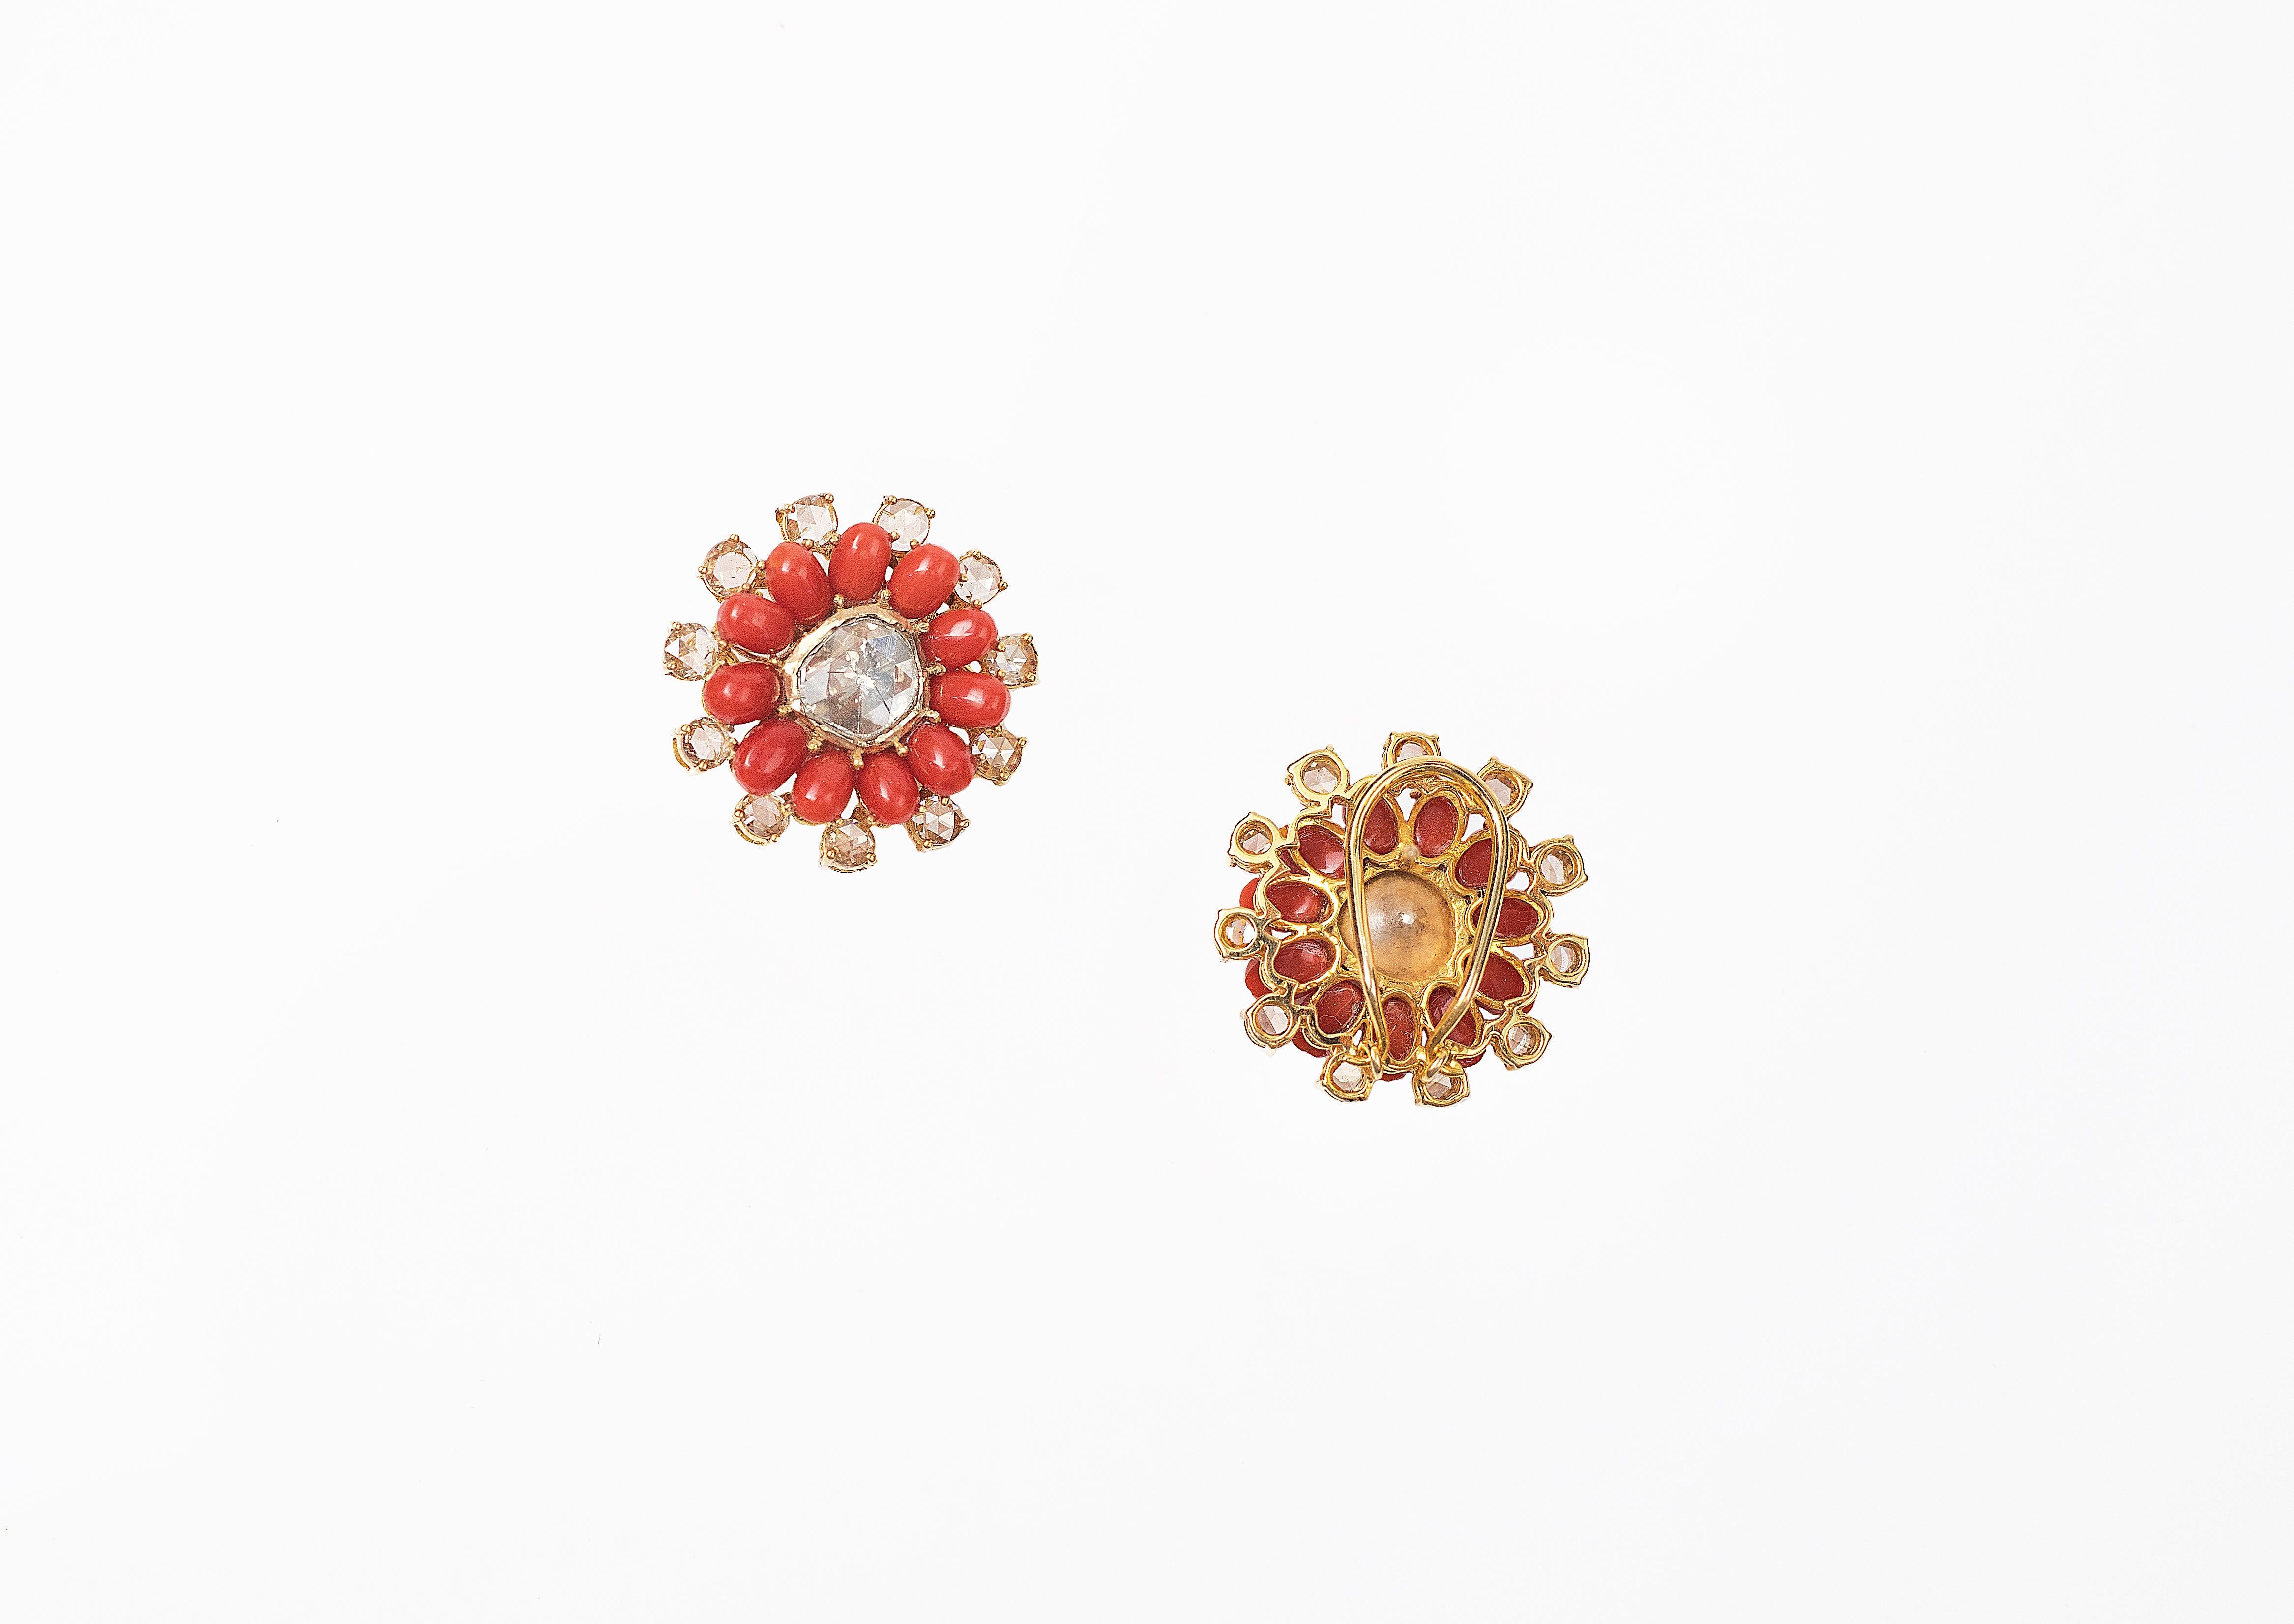 Handcrafted Stud Earrings in 14k Yellow Gold Studded with Flat Cut Diamond, Rose Cut Diamond and Corals.
Gold Weight - 13.920 gms
Colour - Yellow
Diamond Clarity - VS
Colour - G and Yellow
Diamond Shape - Flat Cut and Rose Cut
Stone - Coral
Shape-